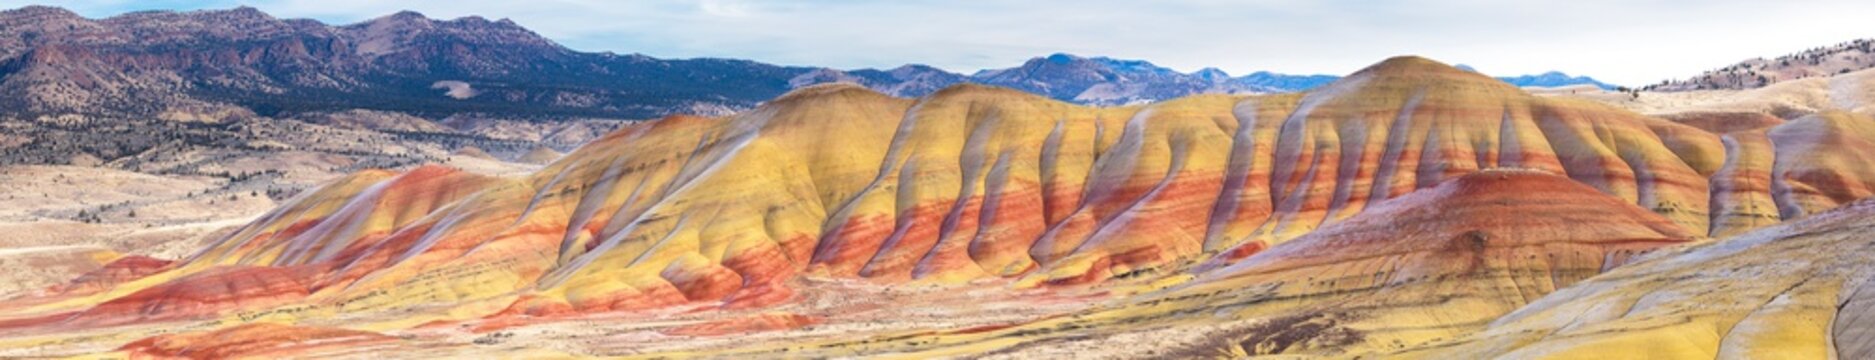 Panorama of the Painted Hills in the John Day Fossil Beds National Monument in eastern Oregon.